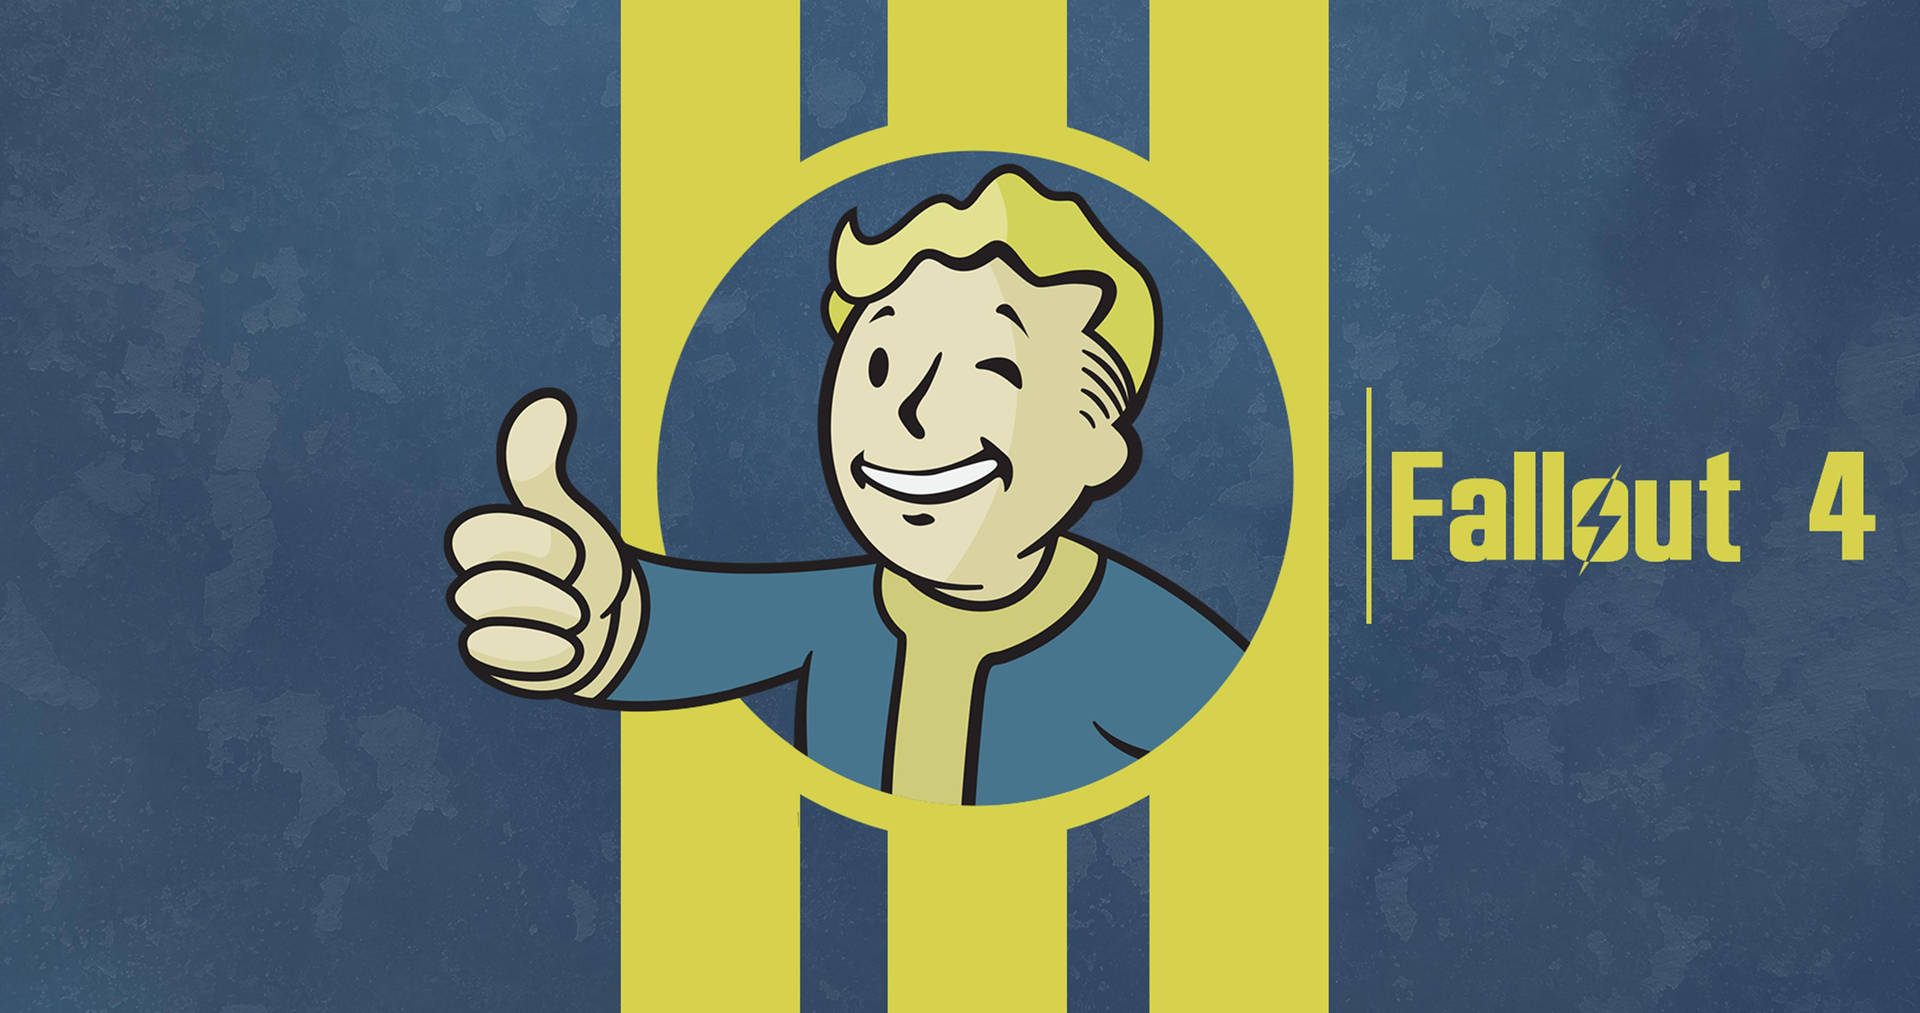 The iconic Vault Boy signals the beginning of an adventure in the Fallout universe. Wallpaper